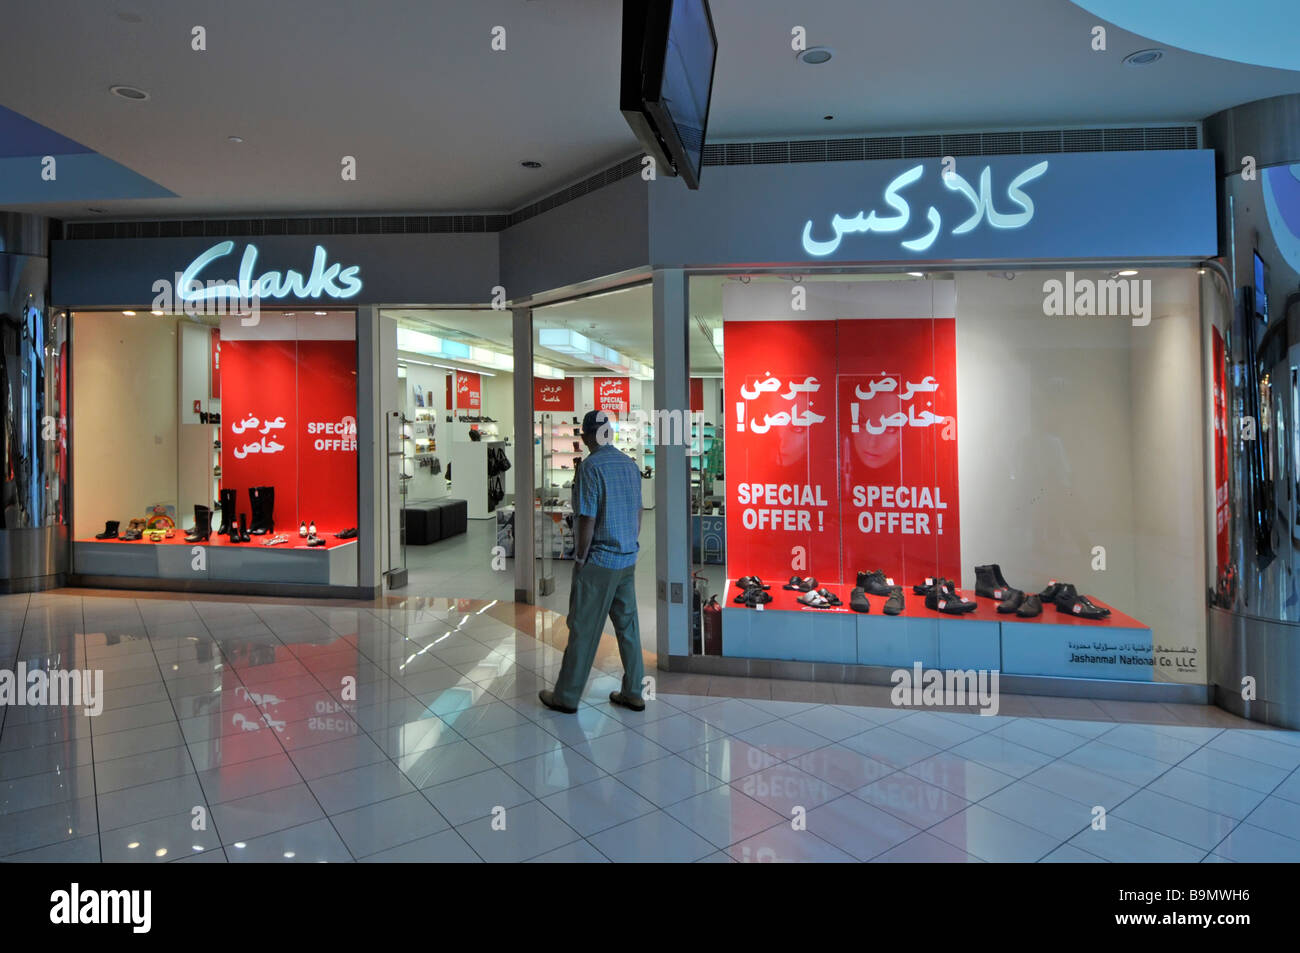 clarks shoes offers in uae